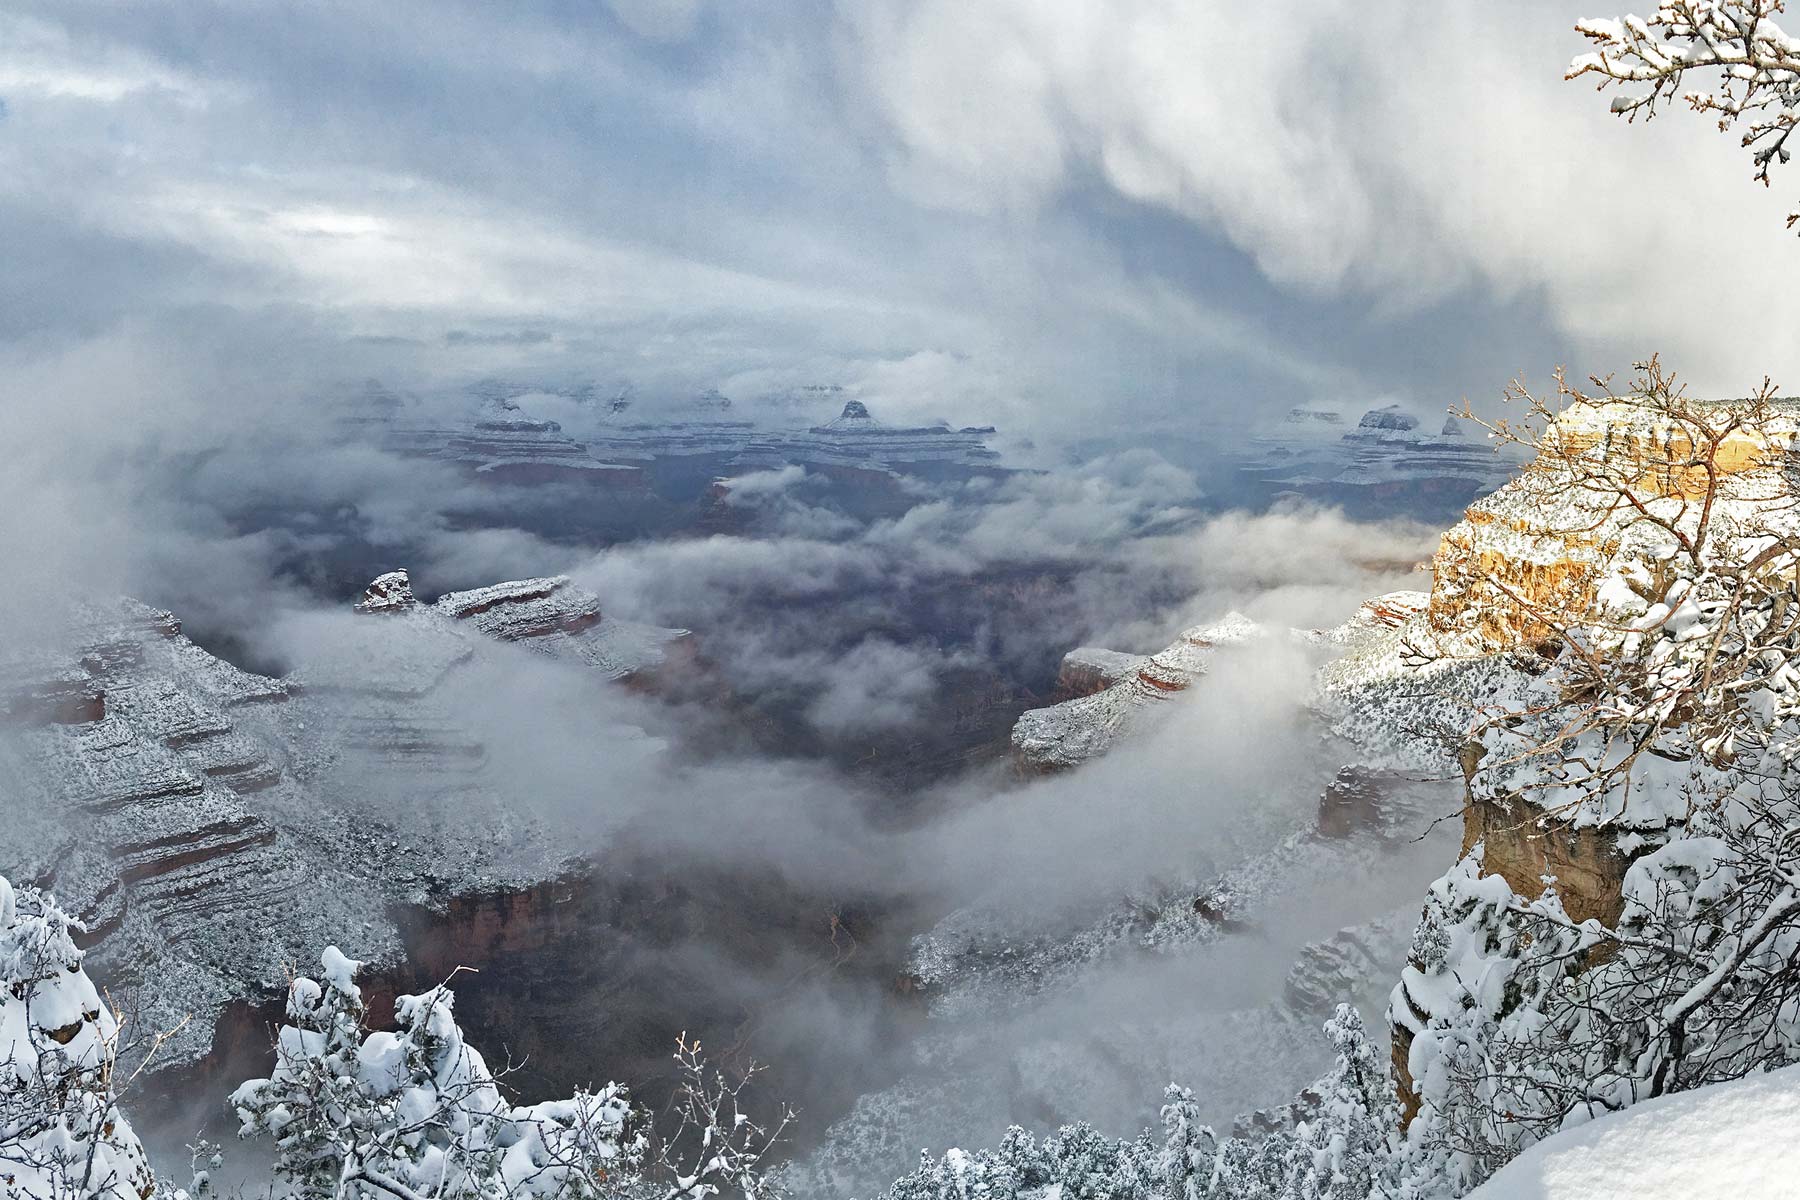 grand canyon in december, winter grand canyon national park